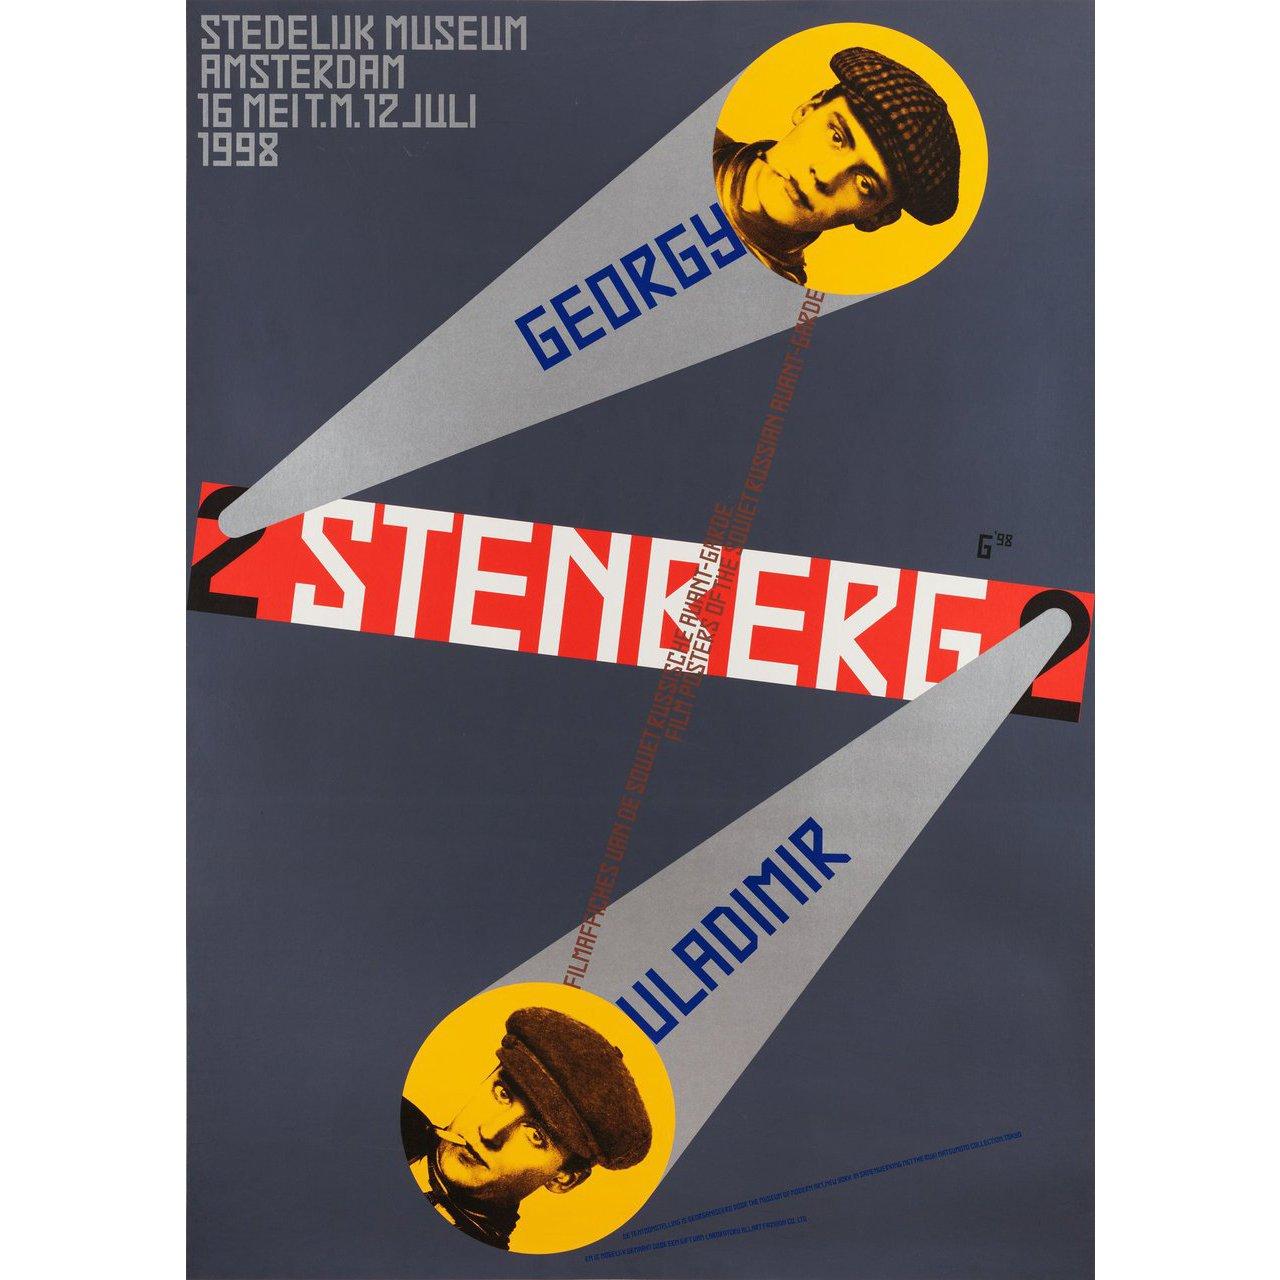 Original 1998 Swiss poster by Gielijn Escher for the film Filmaffiches Van Gregory En Vladamir Stenberg. Fine condition, linen-backed. This poster has been professionally linen-backed. Please note: the size is stated in inches and the actual size